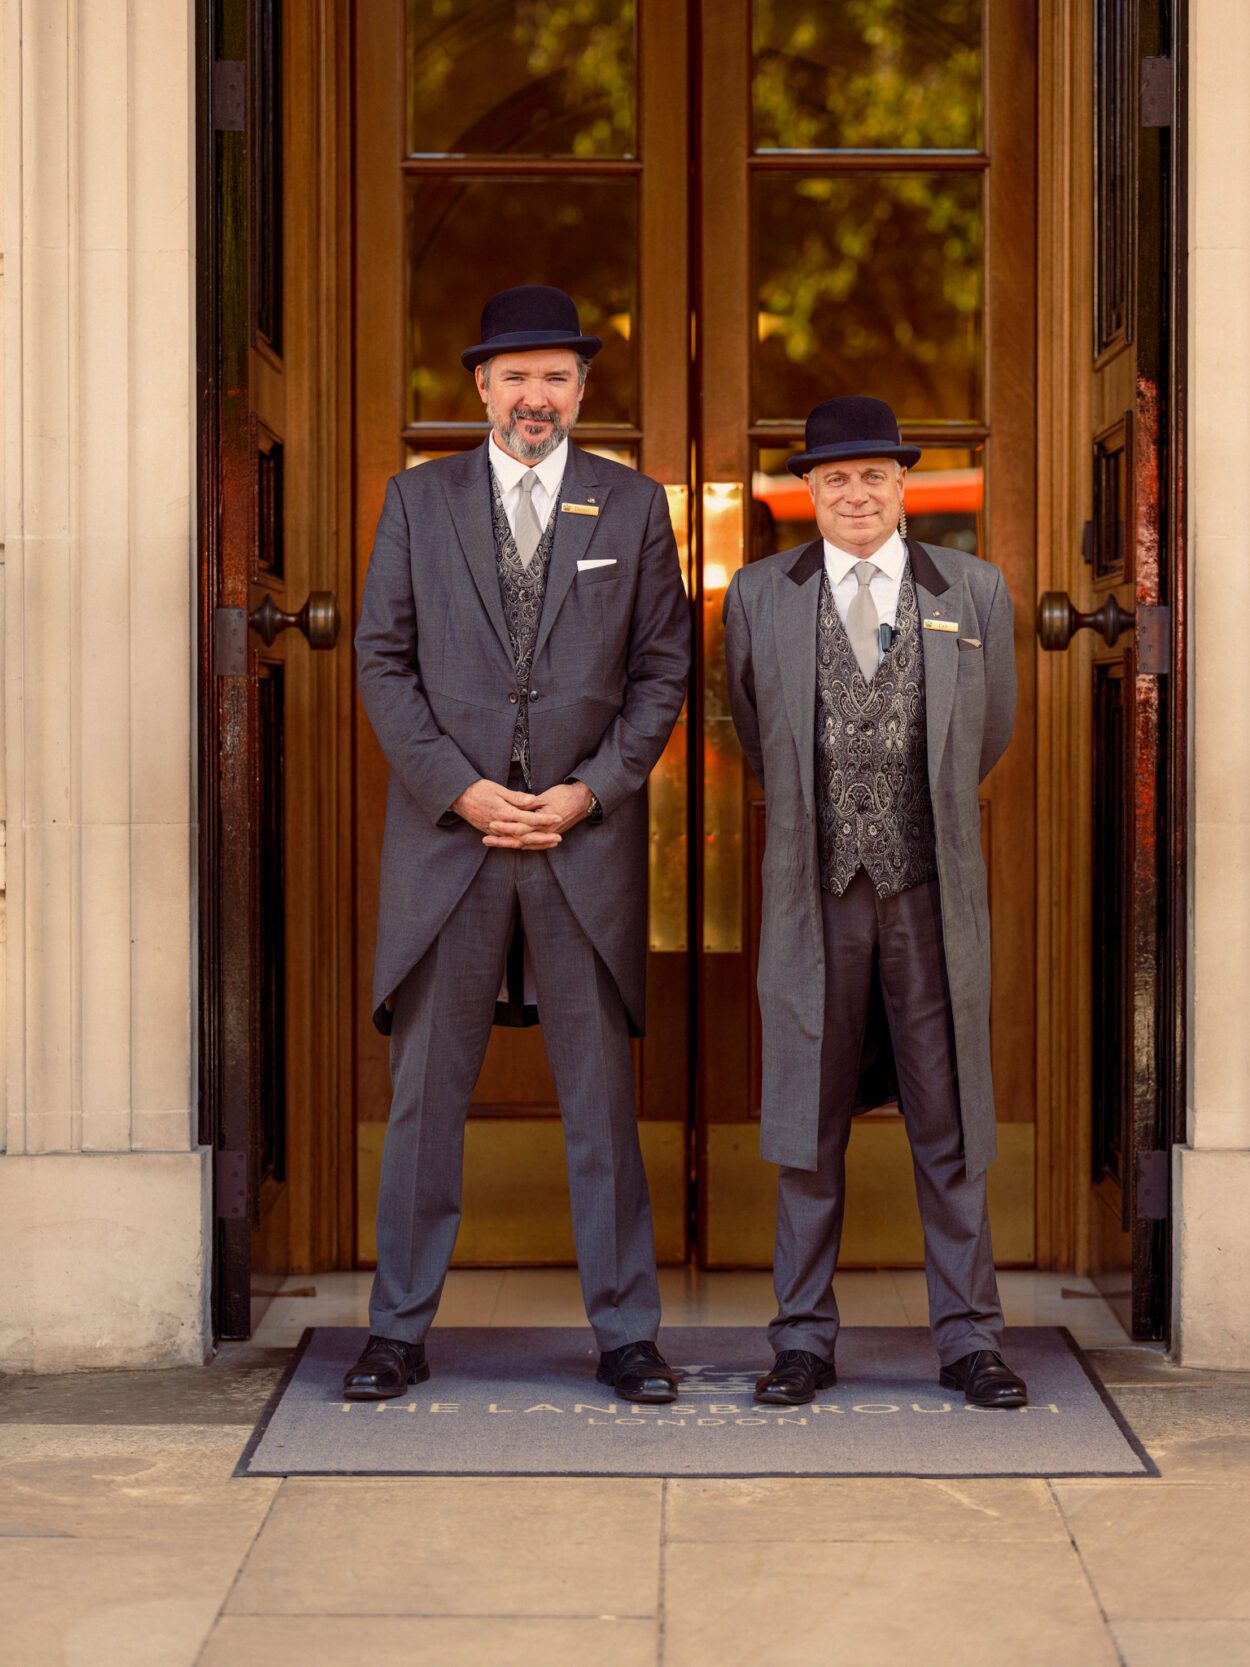 Two doorman, one taller than the other, stand by the entrance to a building. They are wearing top hats and formal attire.